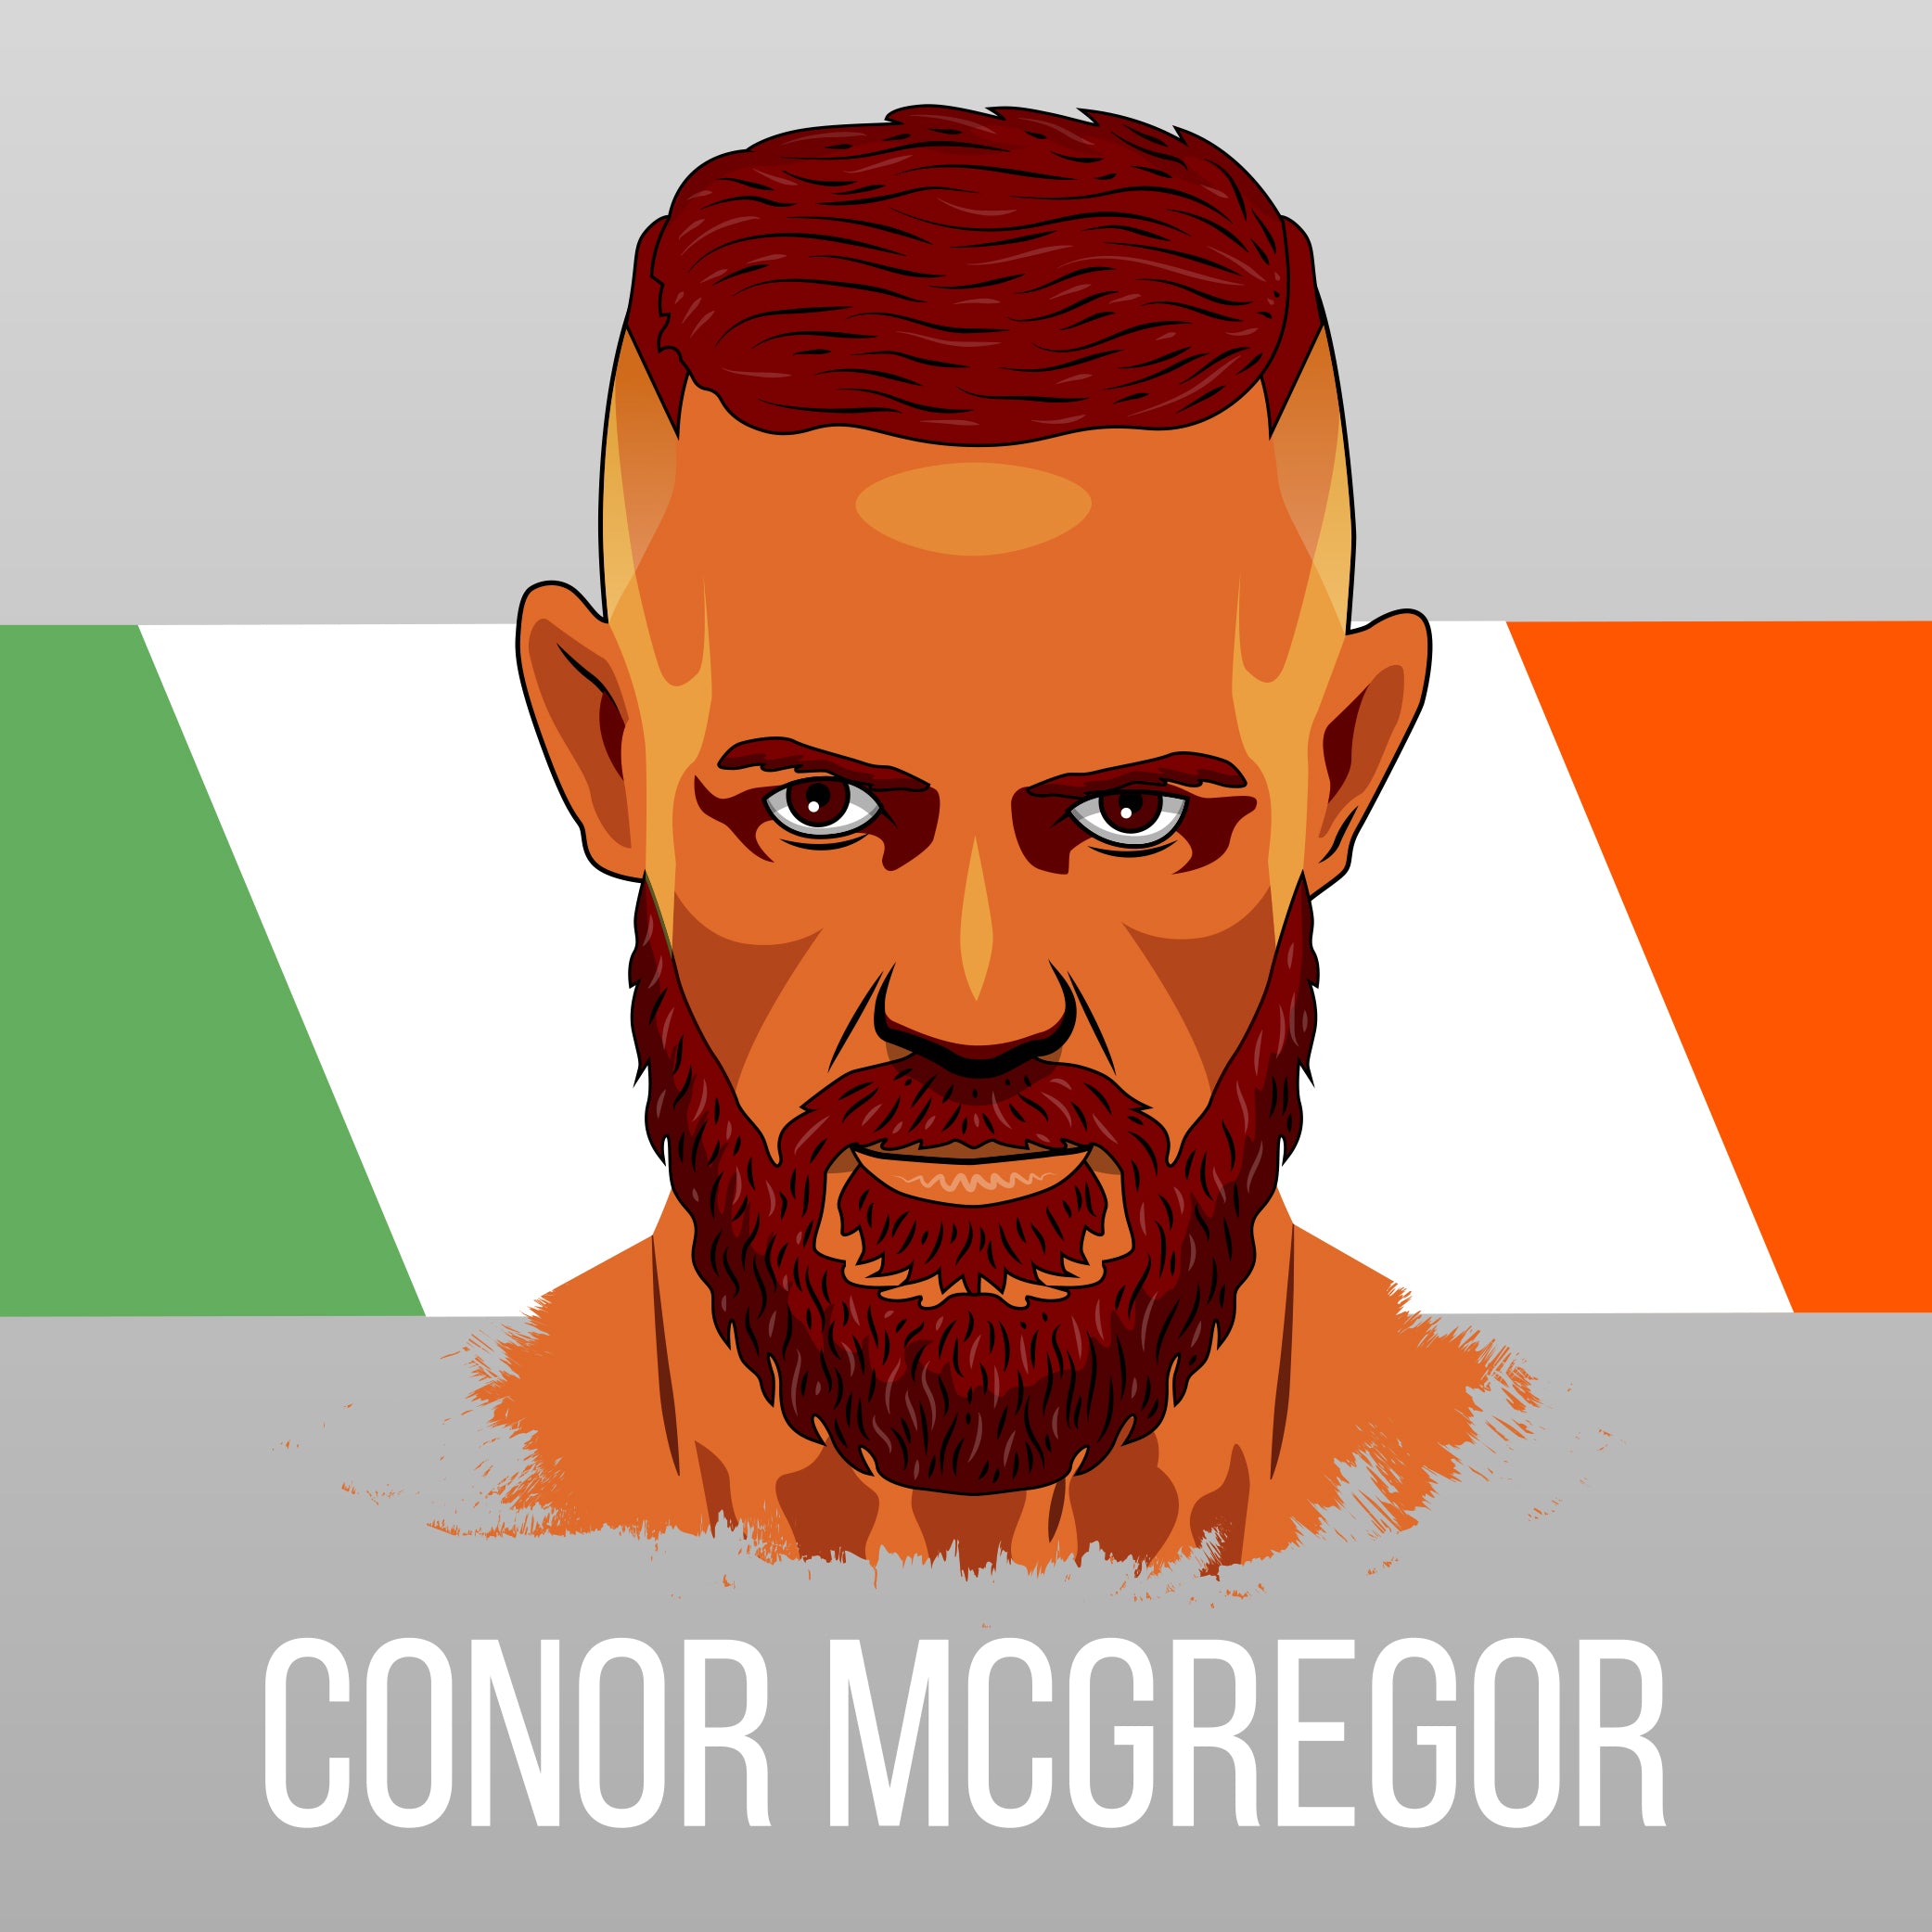 How Does Connor McGregor Train?